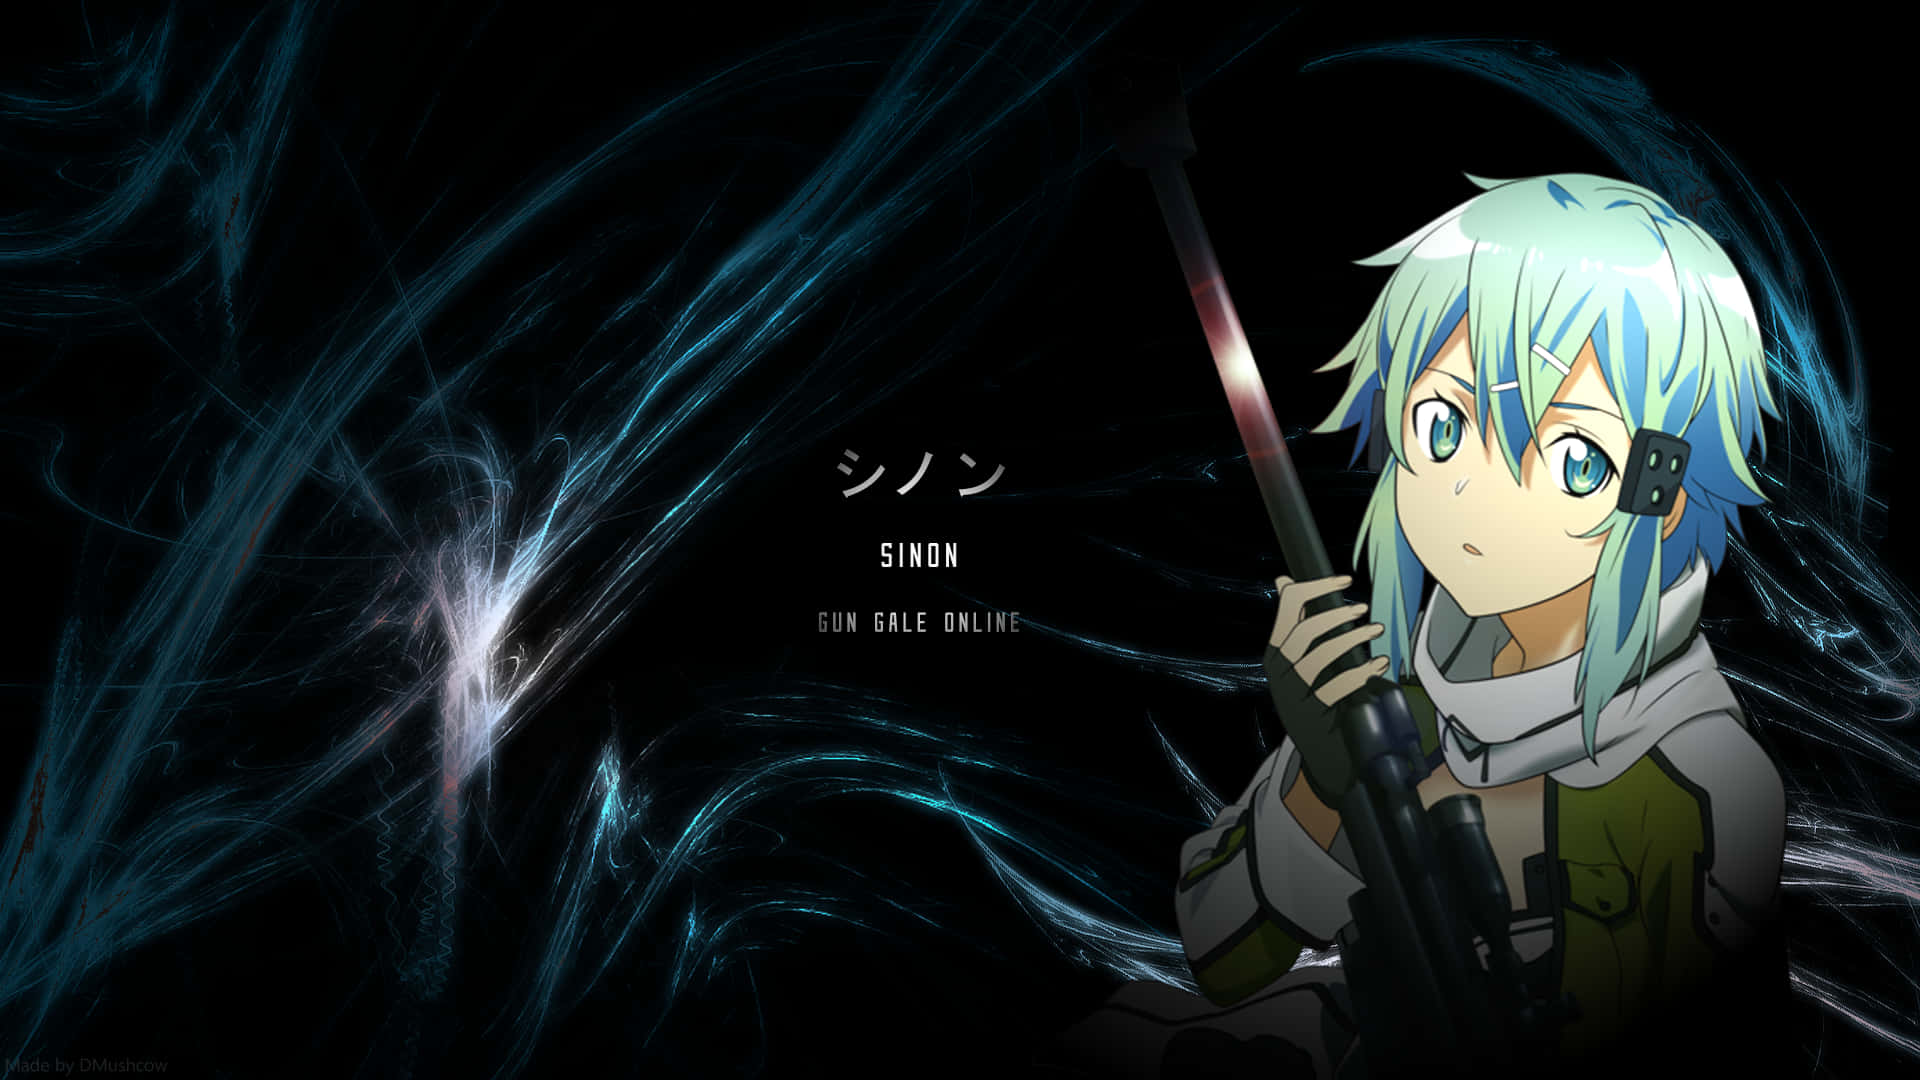 Sinon,den Modiga Krigaren. (assuming This Is A Potential Wallpaper Design Featuring Sinon As A Character From A Video Game Or Anime.) Wallpaper